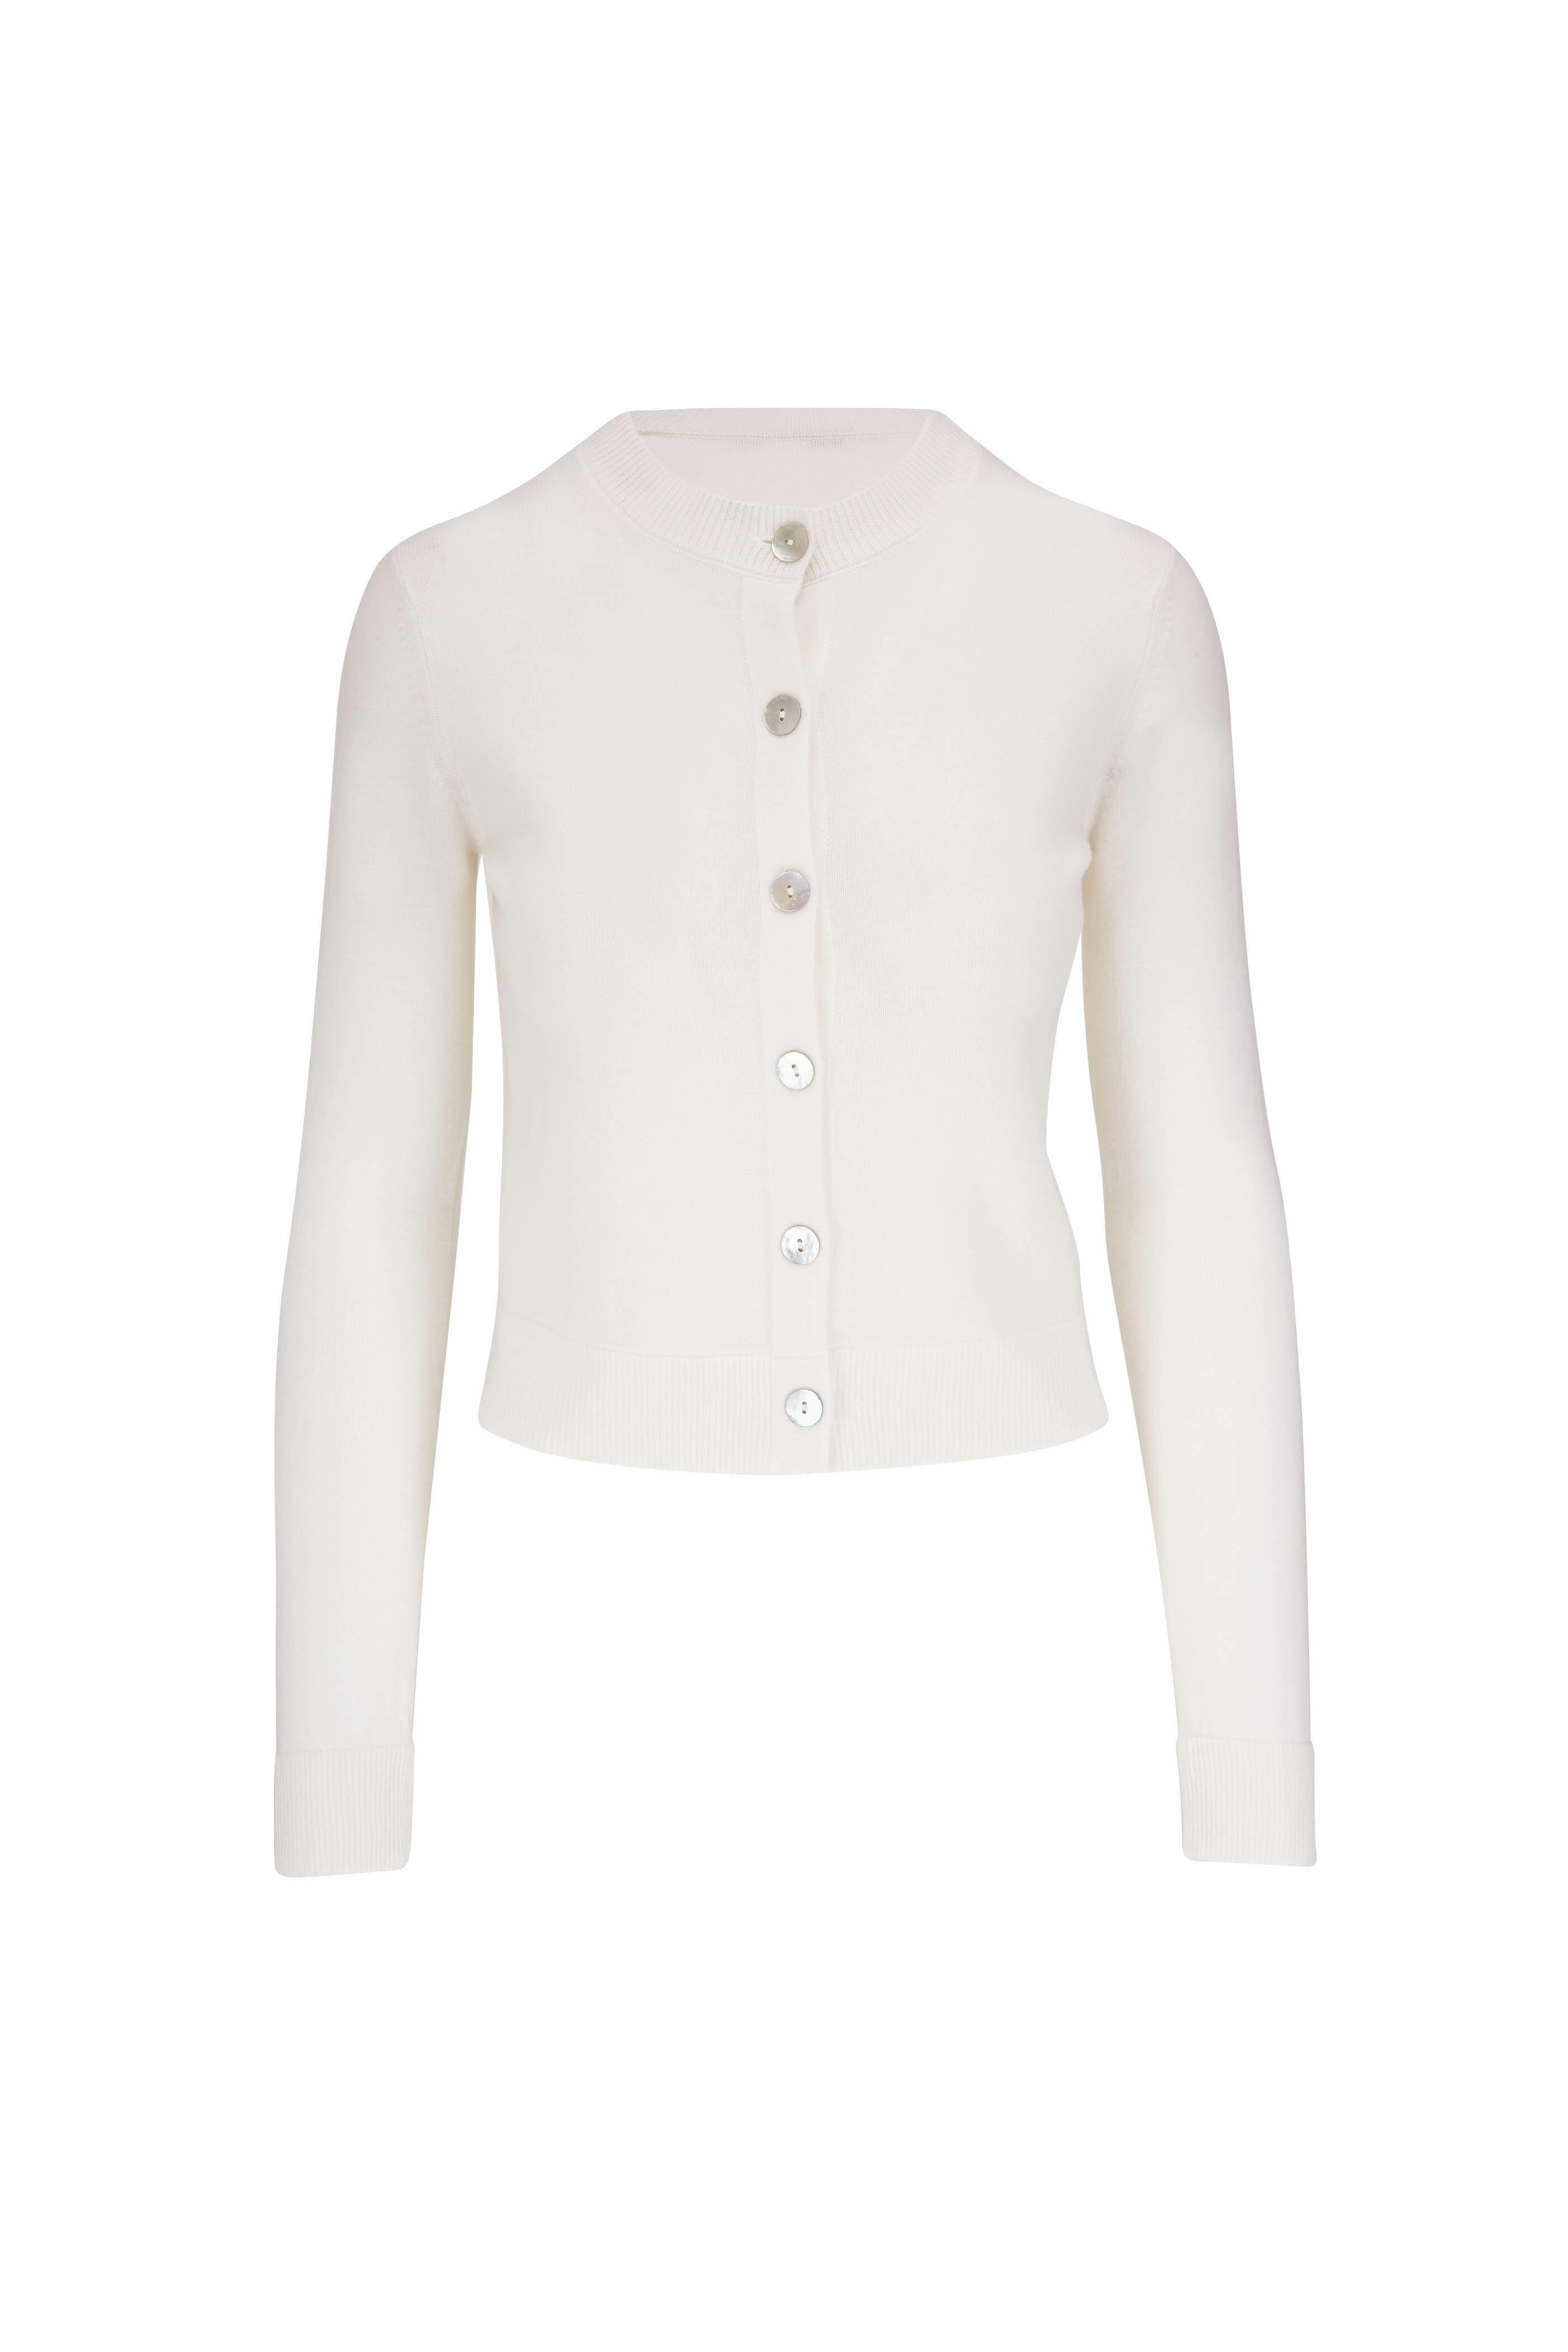 Vince - White Wool & Button Front Cardigan